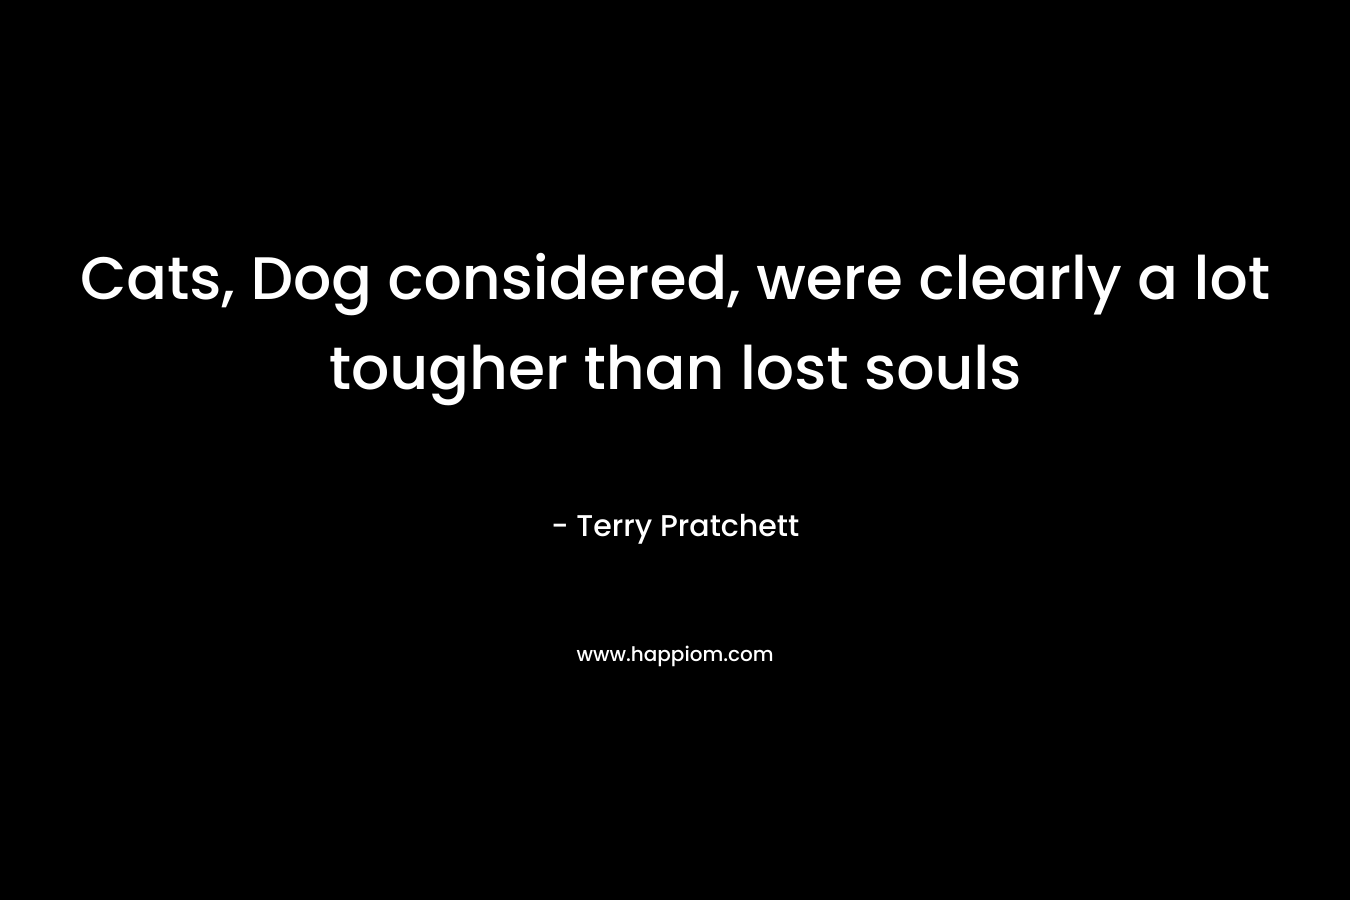 Cats, Dog considered, were clearly a lot tougher than lost souls – Terry Pratchett